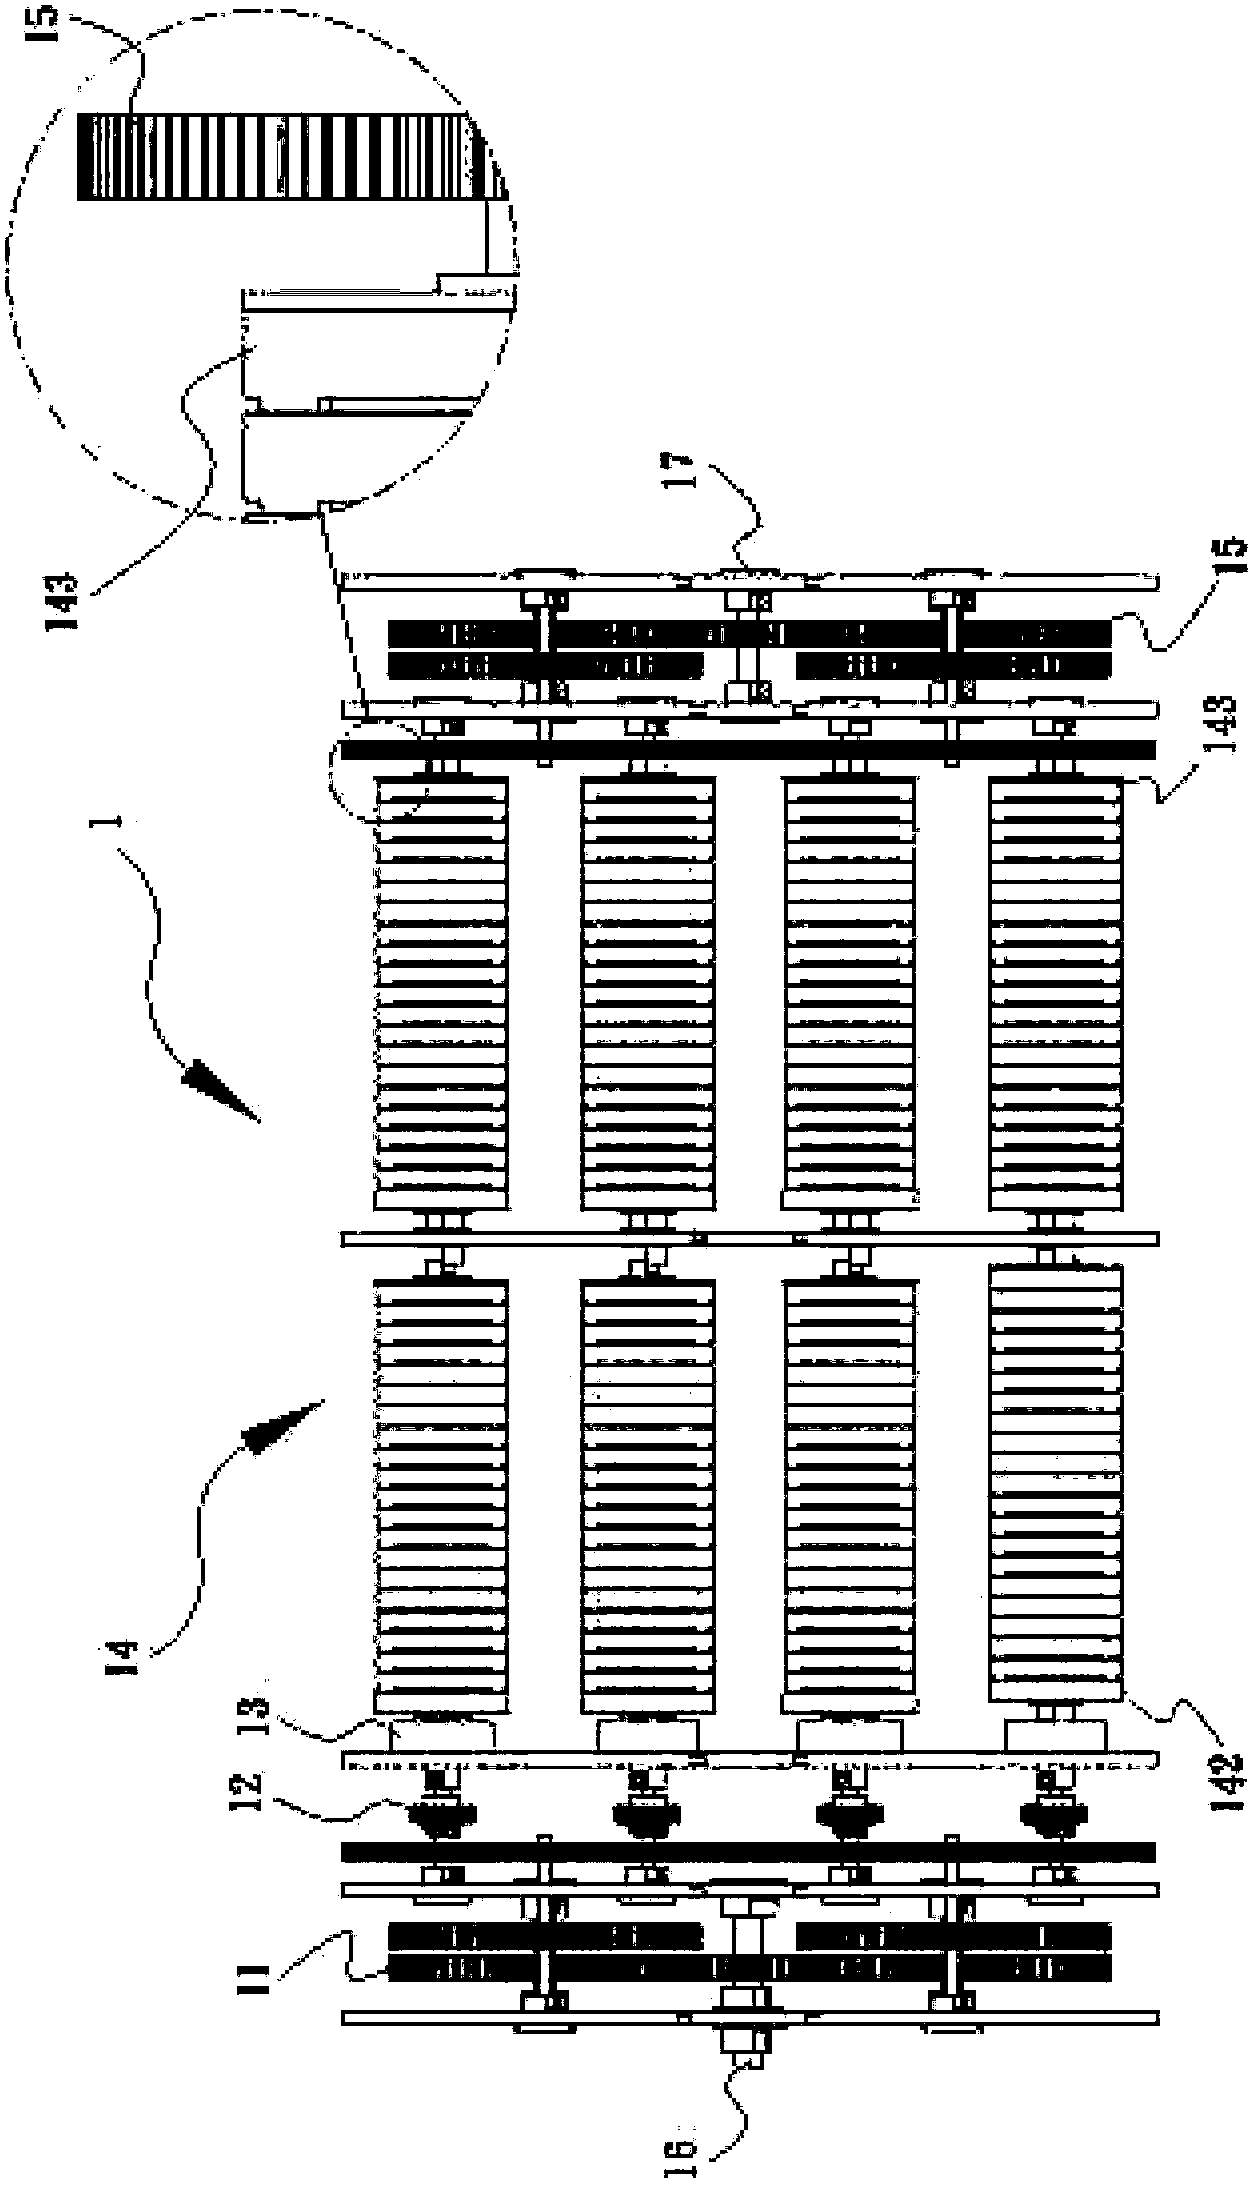 Energy storage device for storing energy as spring torsion